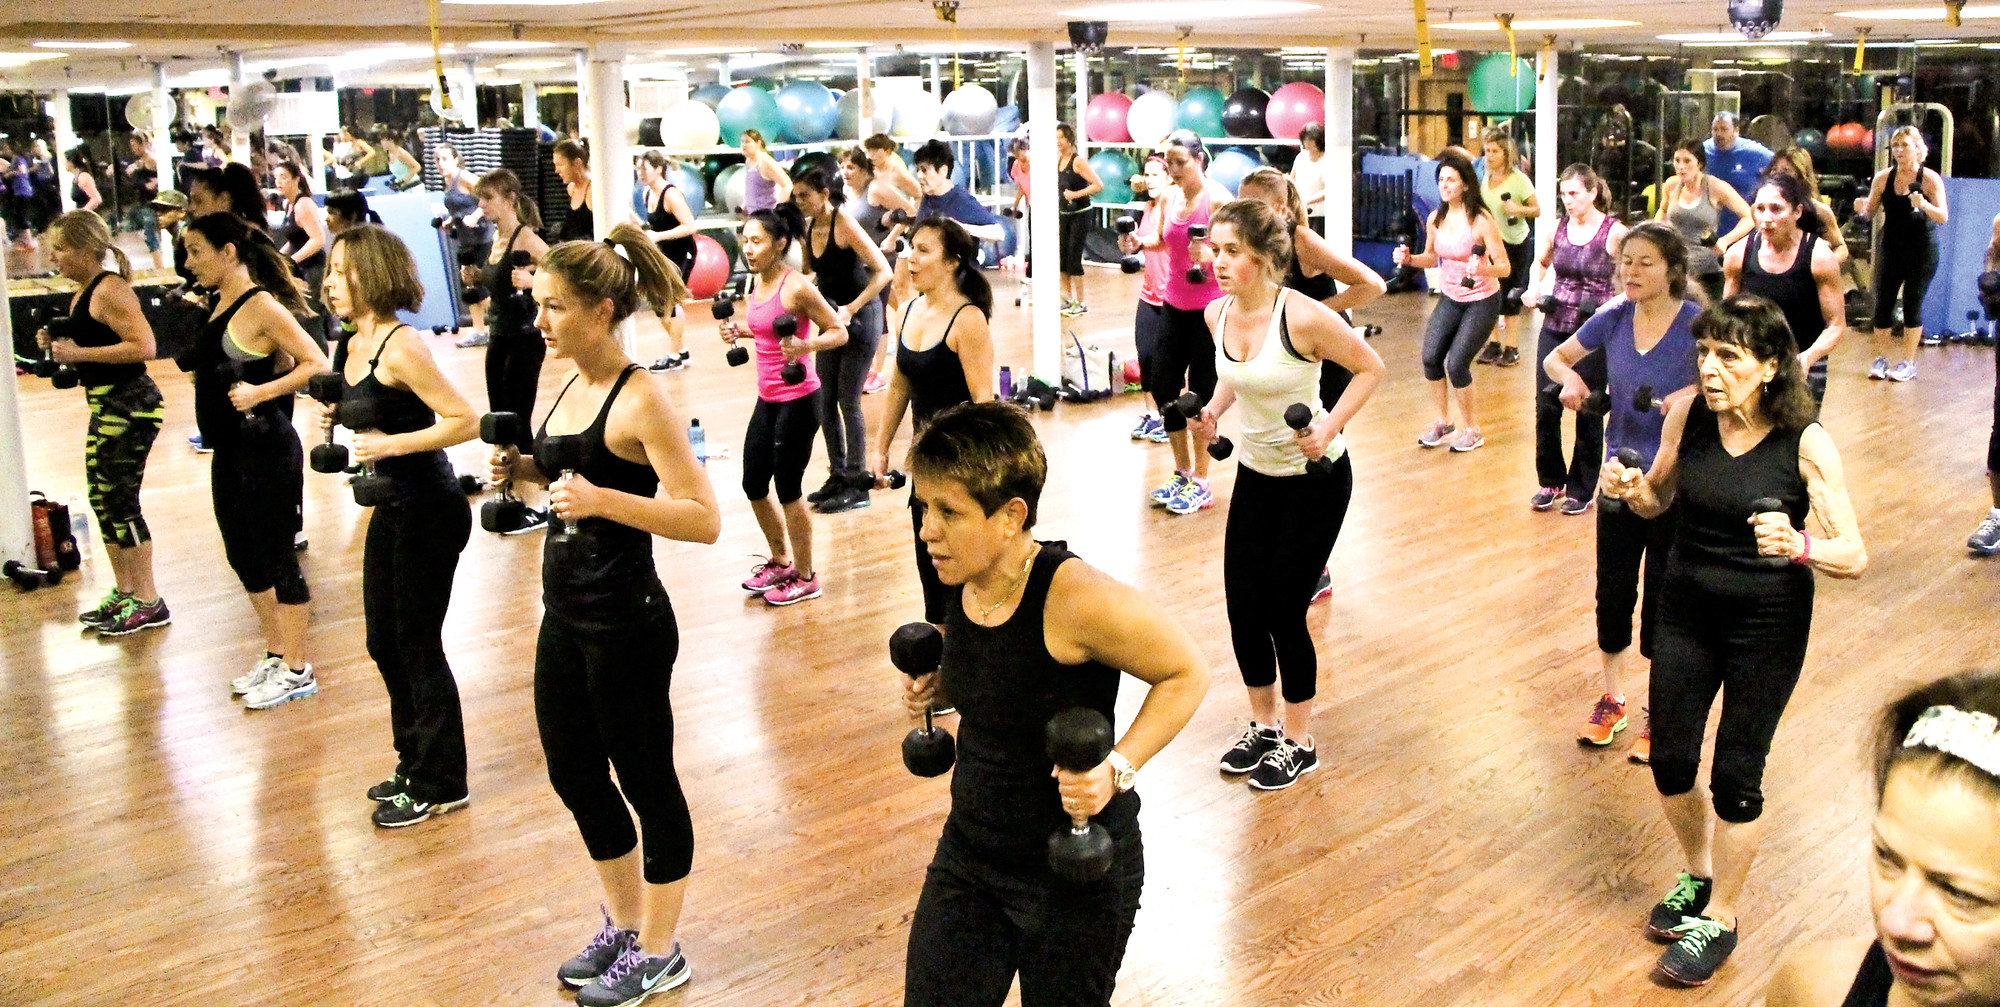 Many people from all over came to Sky Athletic Club in Rockville Centre for the special fundraiser class.